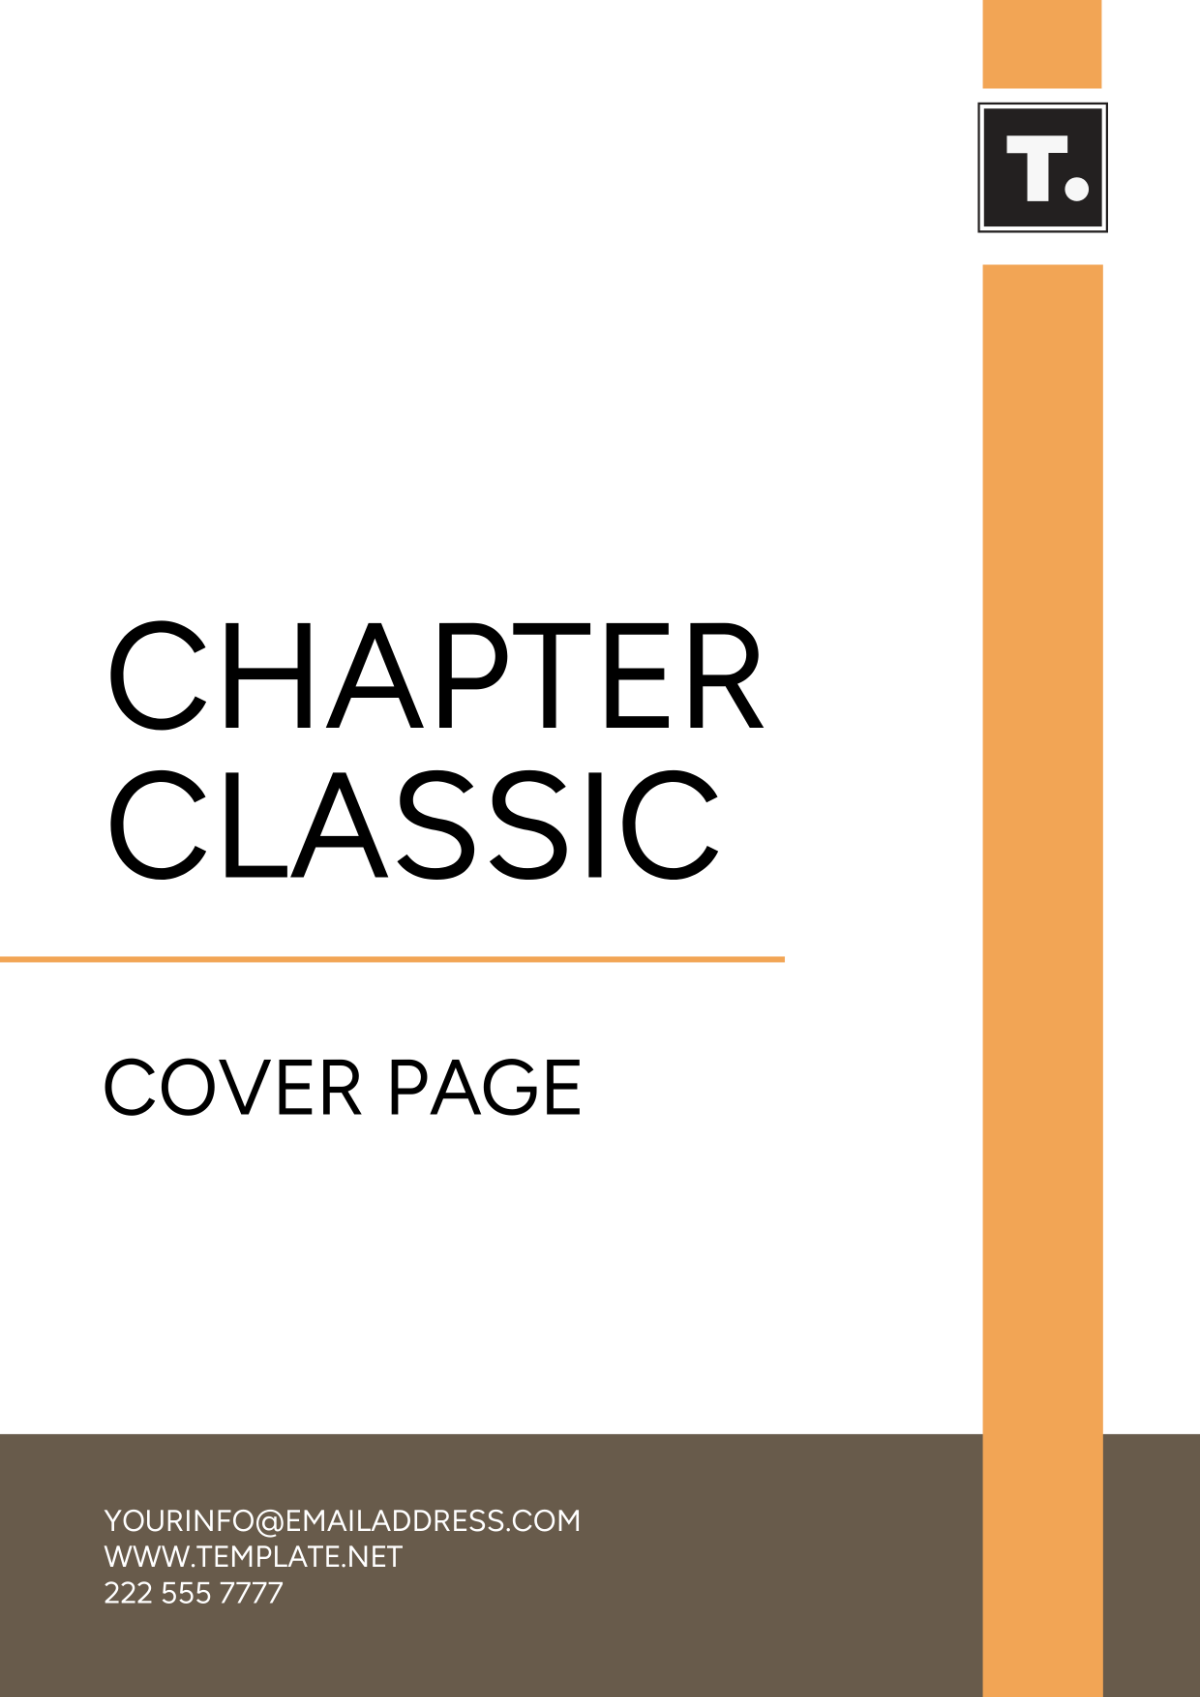 Chapter Classic Cover Page